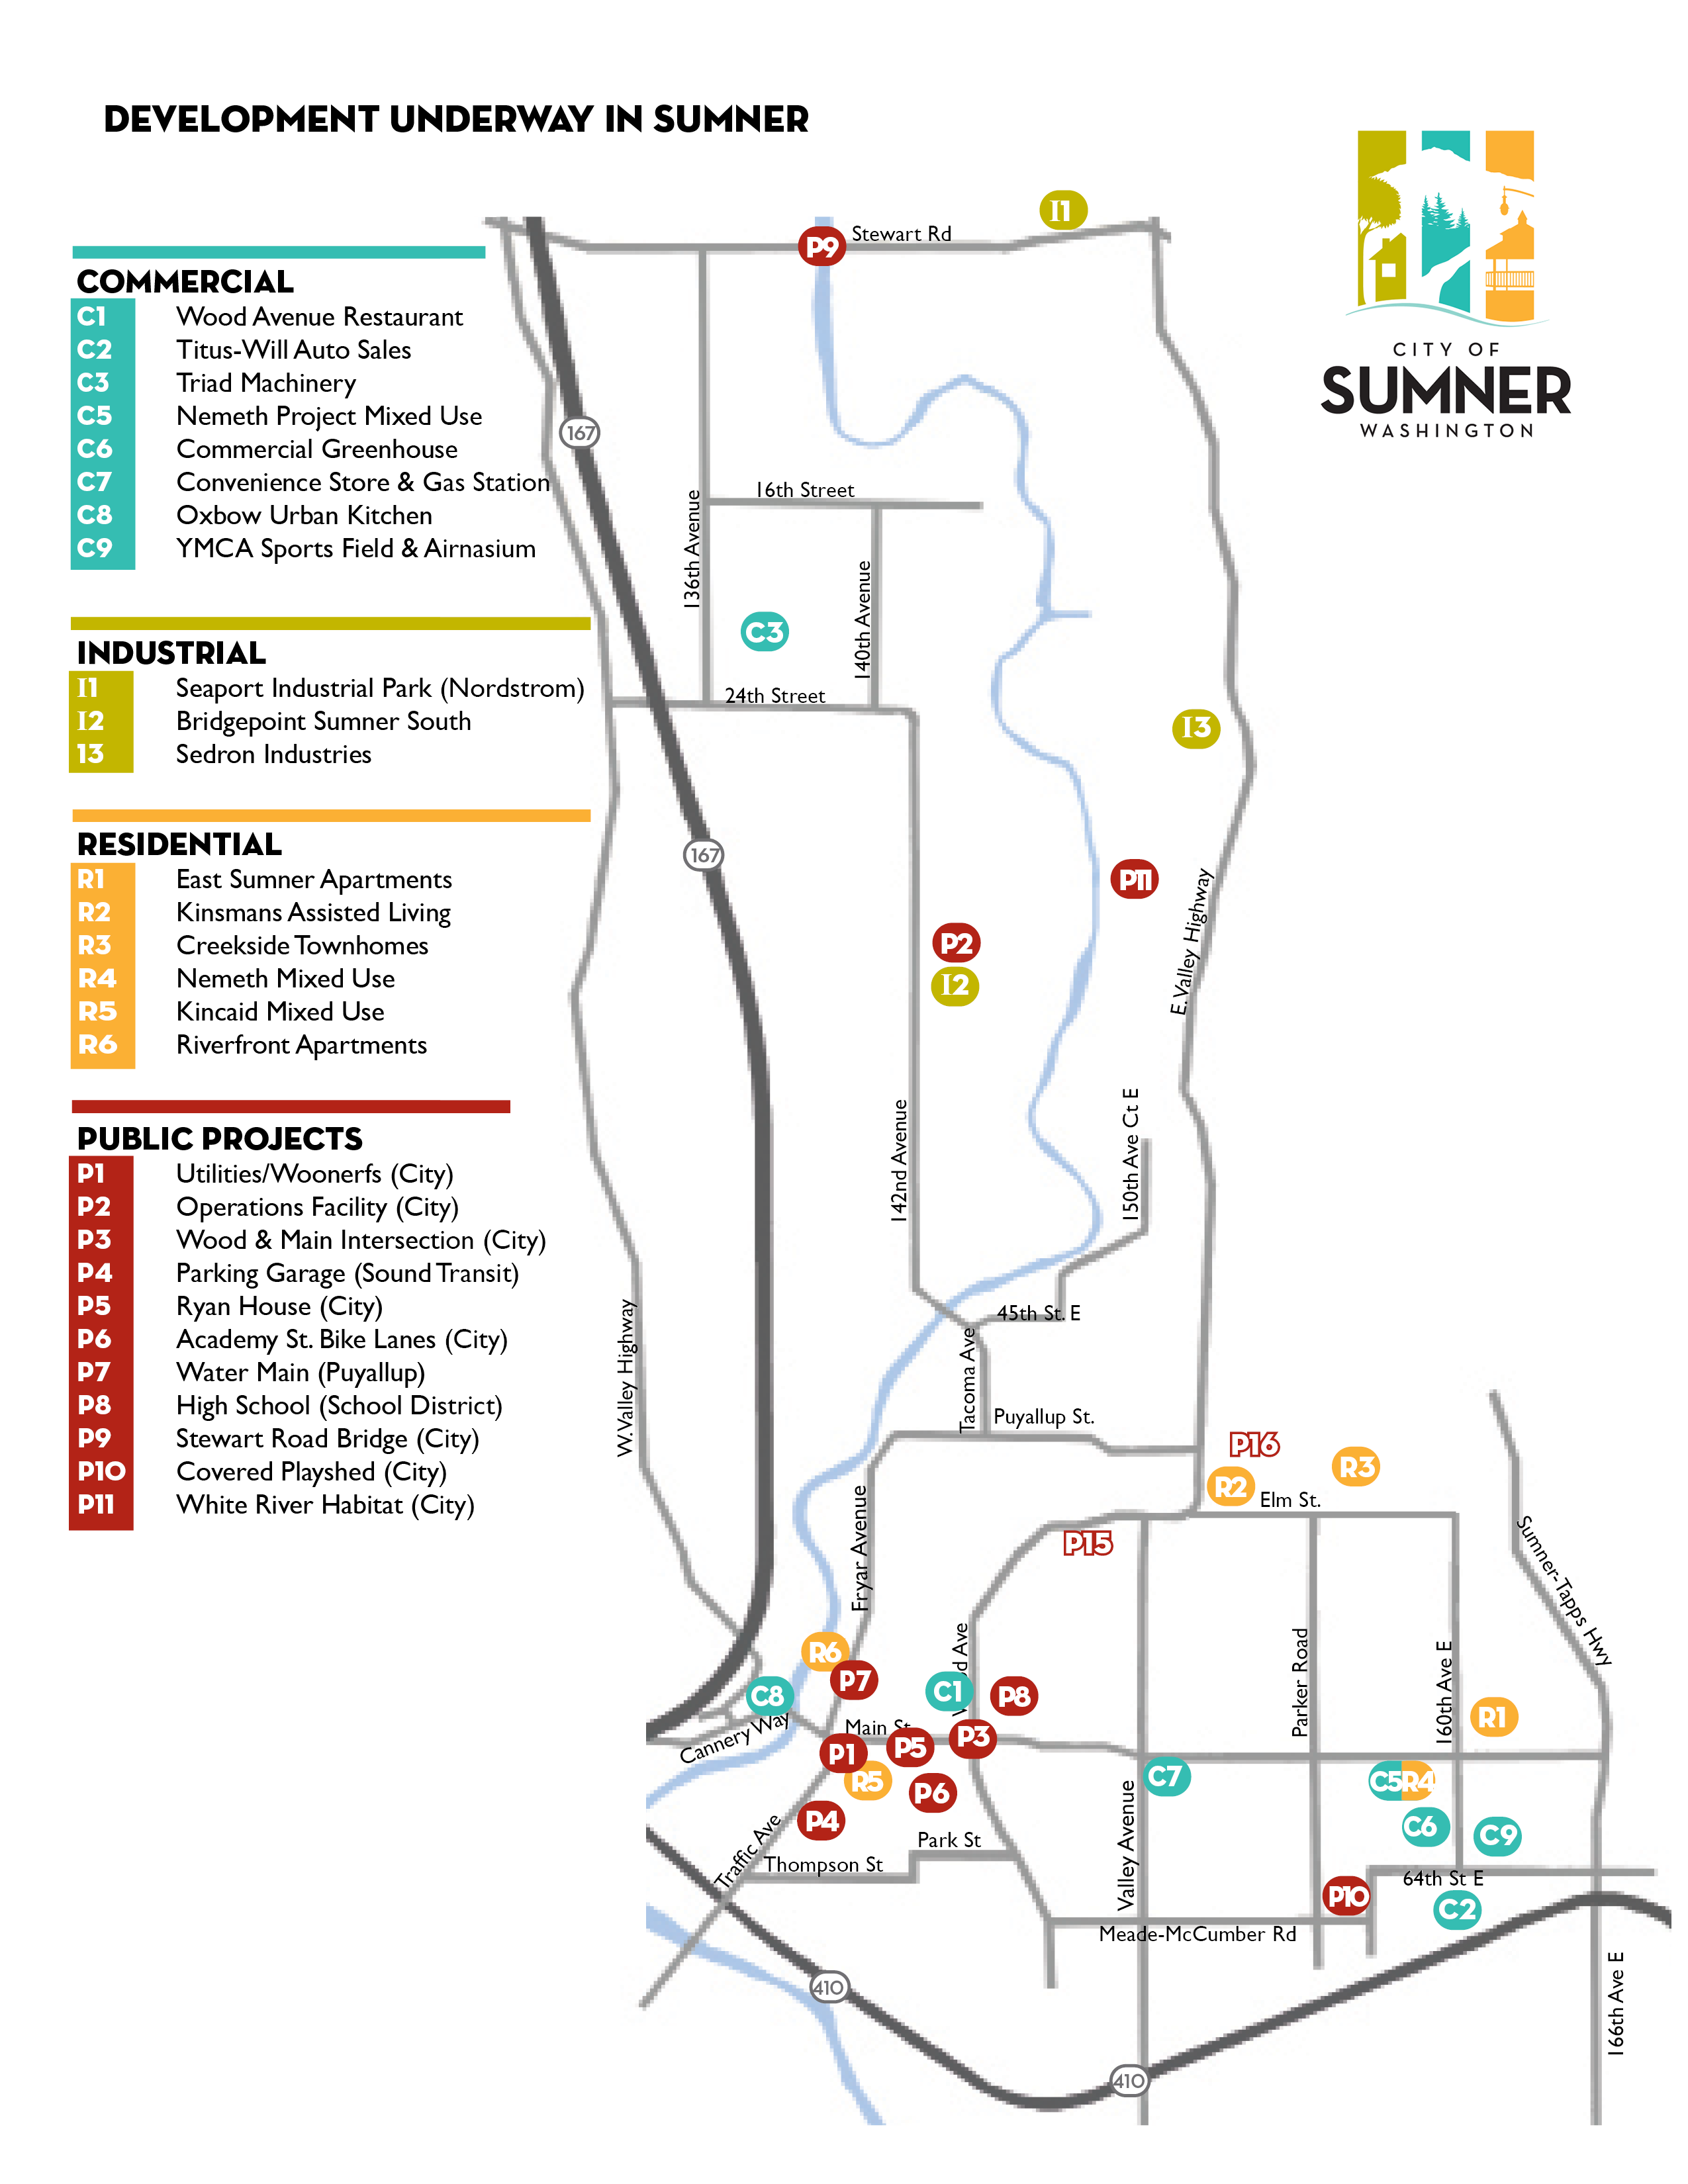 Map of Sumner showing current development for commercial, industrial, residential and public projects. 